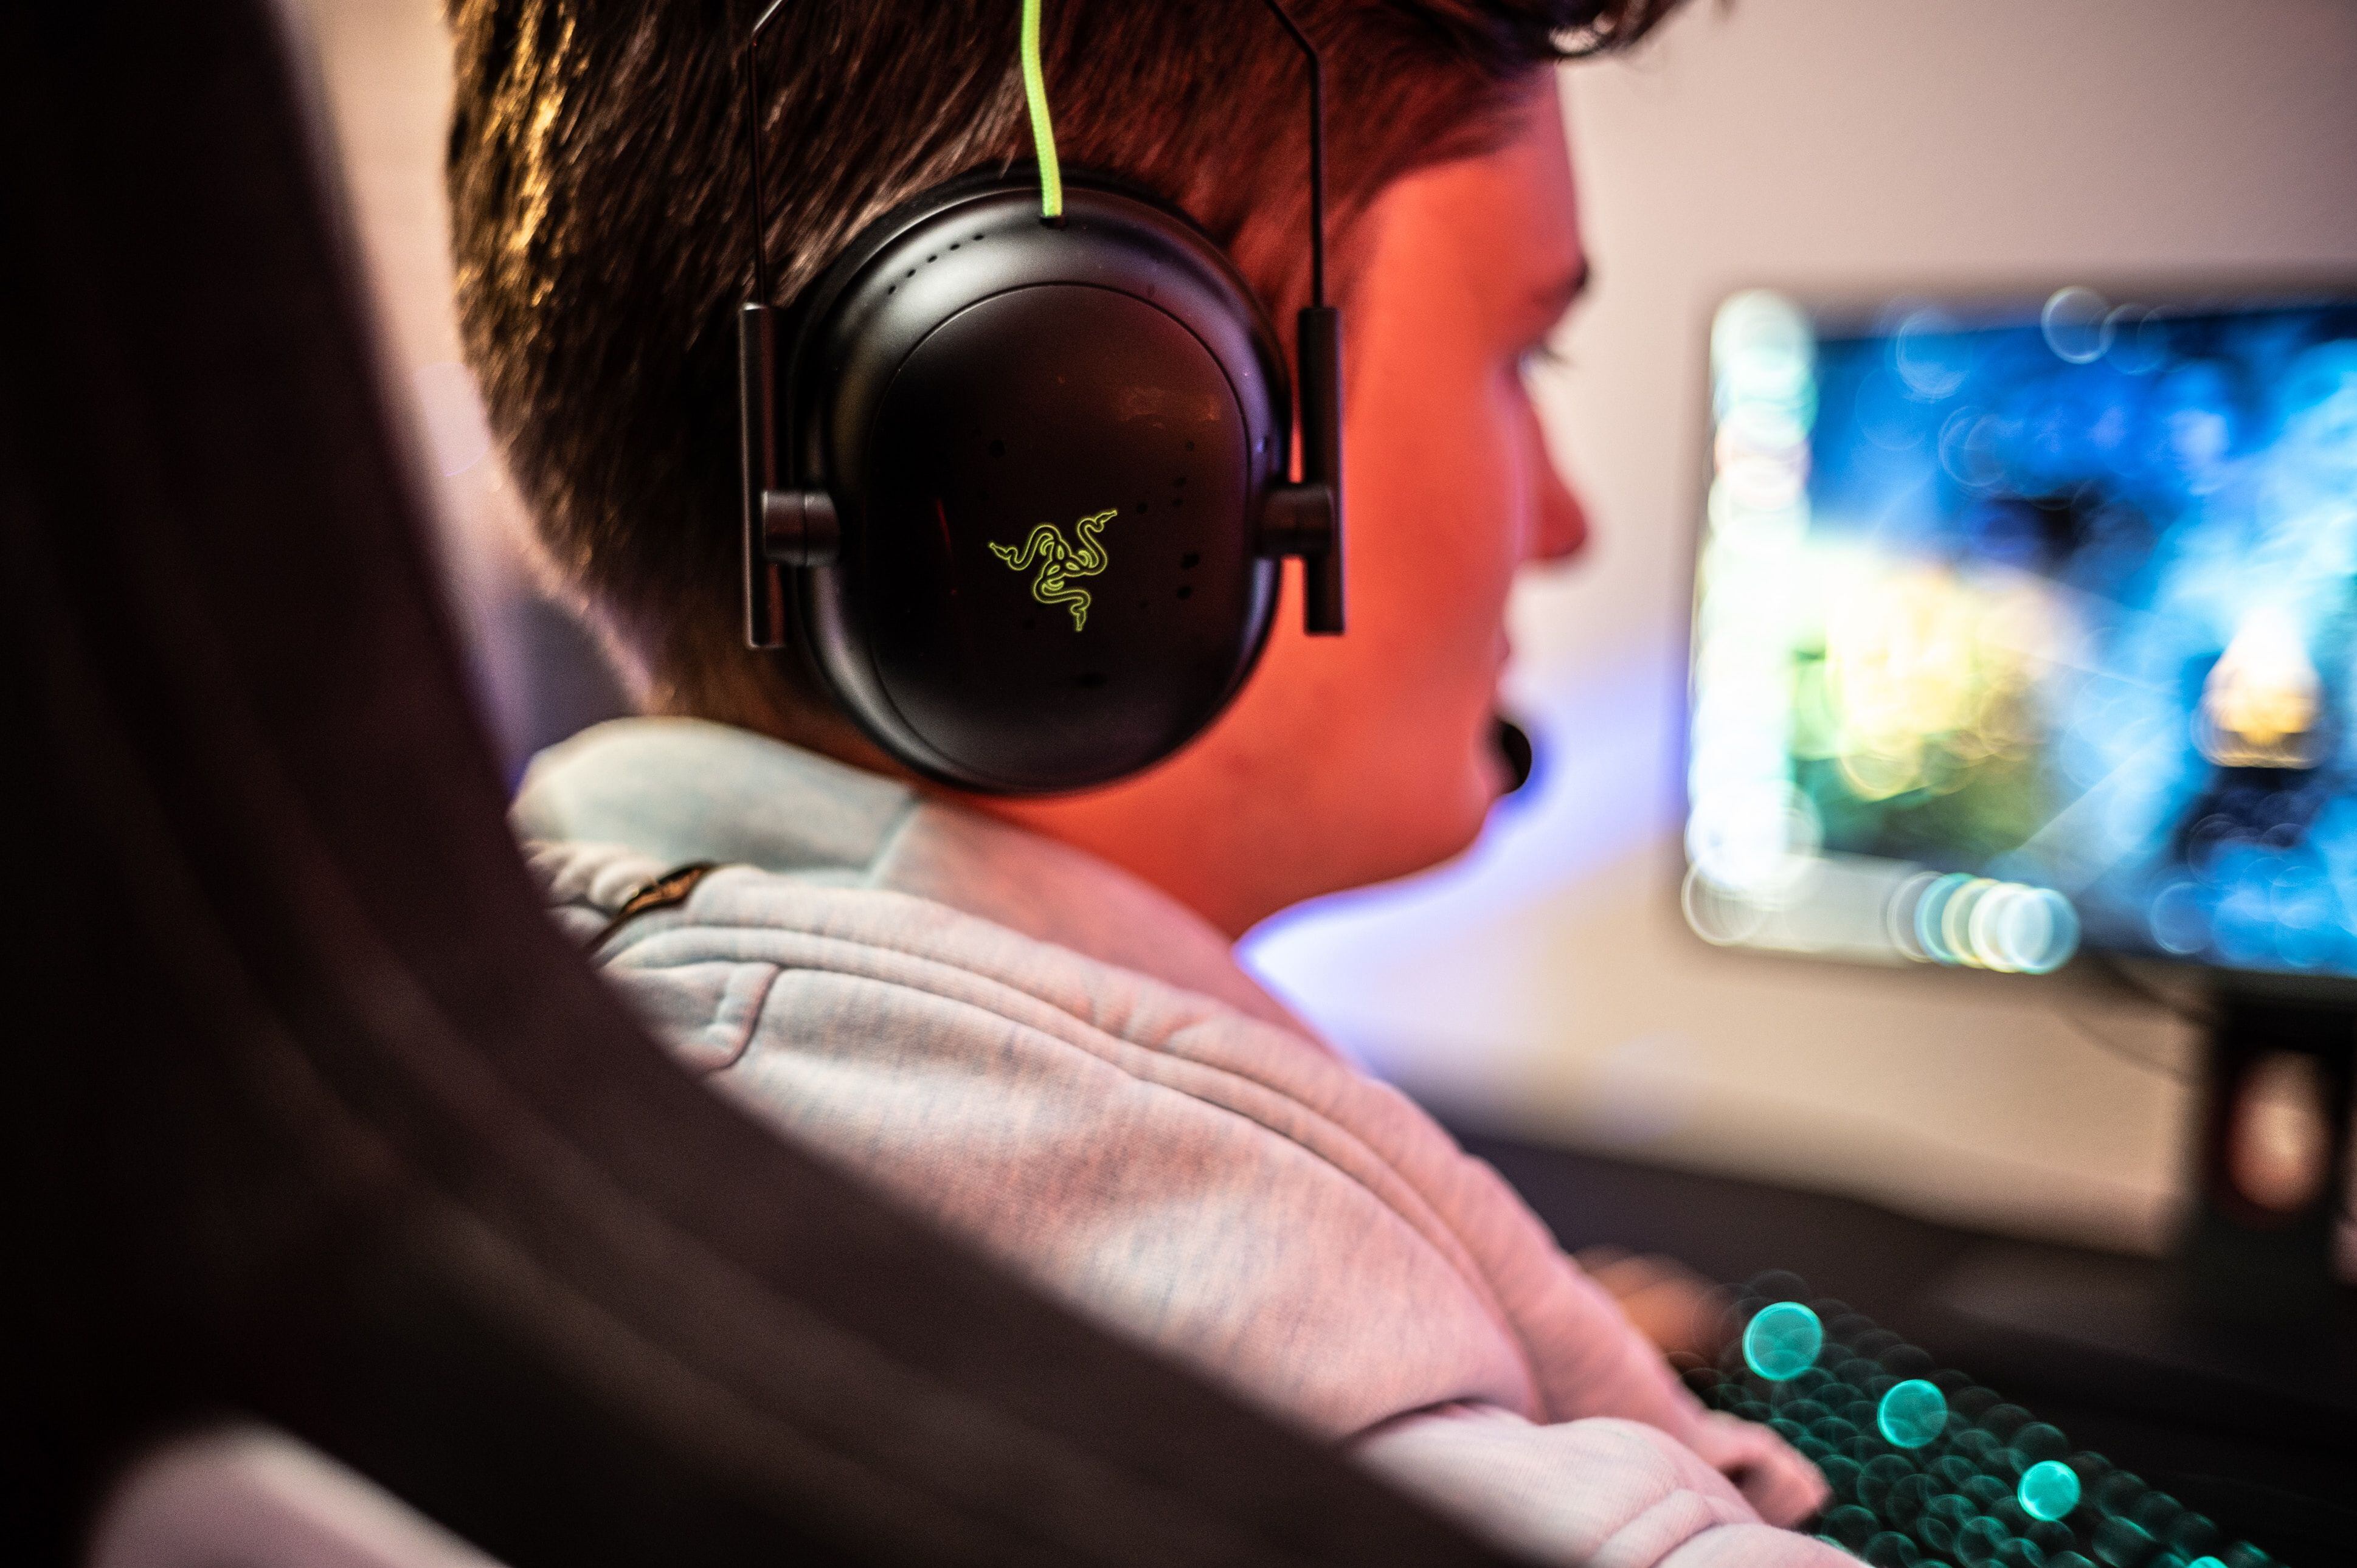 doctors warn of hearing loss impact of too-loud gaming among young people